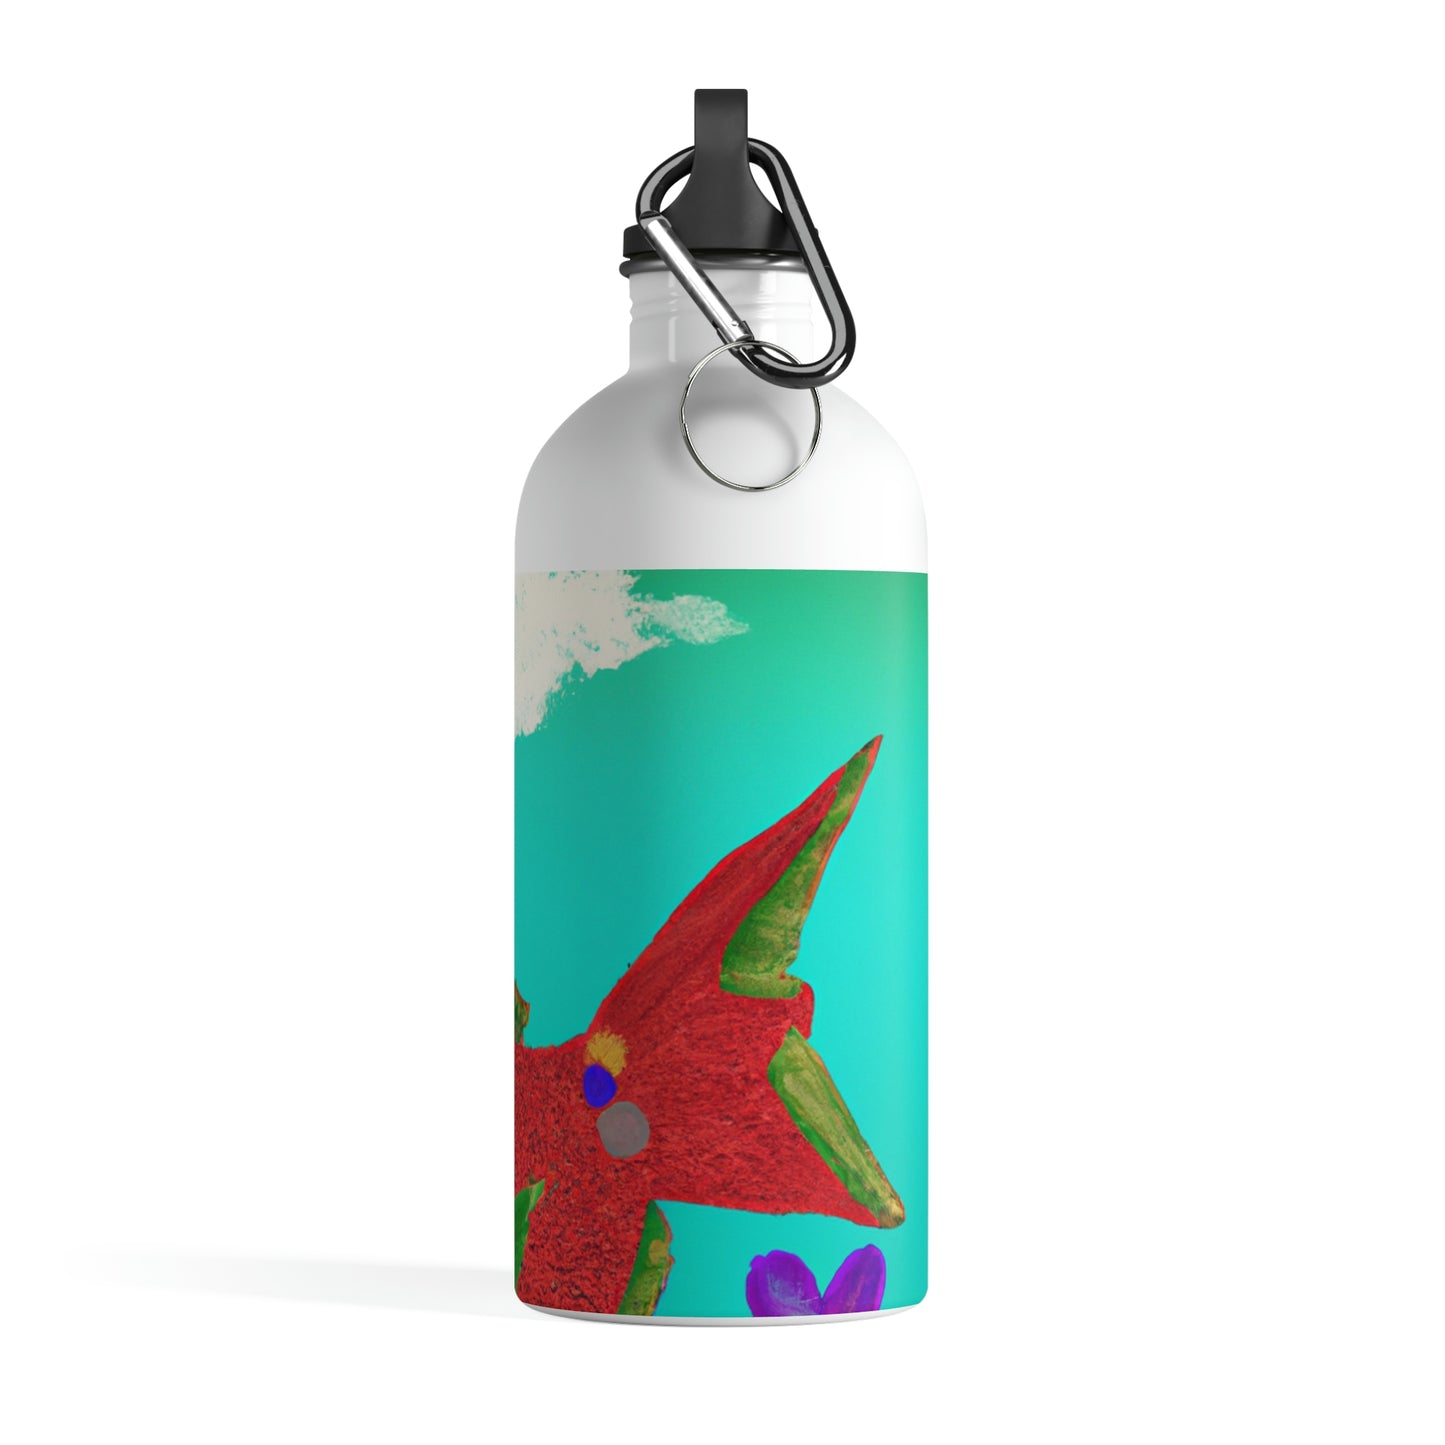 The Mysterious Flying Fish and Its Enigmatic Secret - The Alien Stainless Steel Water Bottle